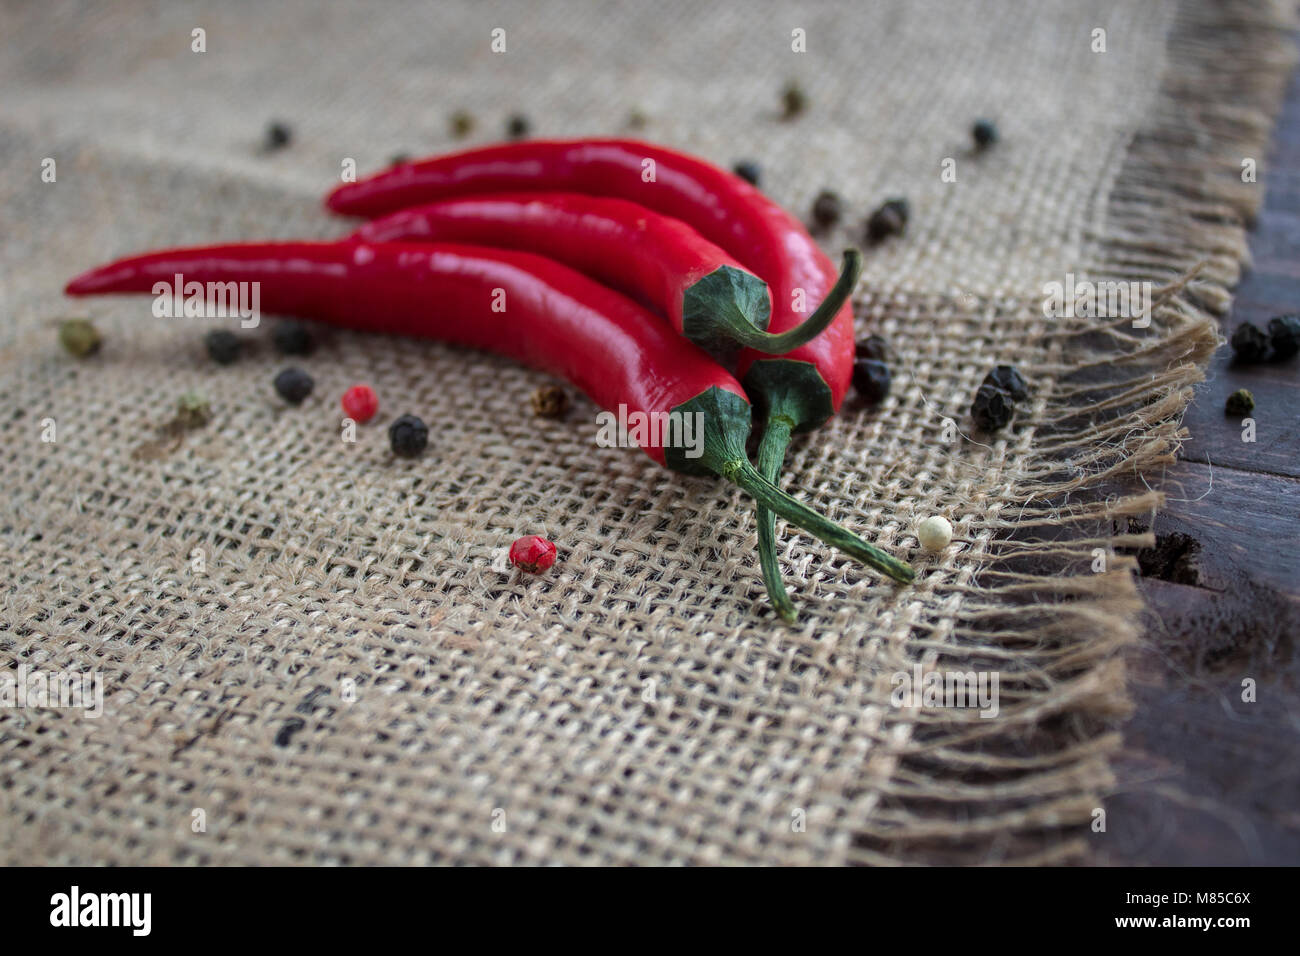 Chili pepper lies on a sackcloth on a wooden table. On the table scattered dry peppercorns Stock Photo